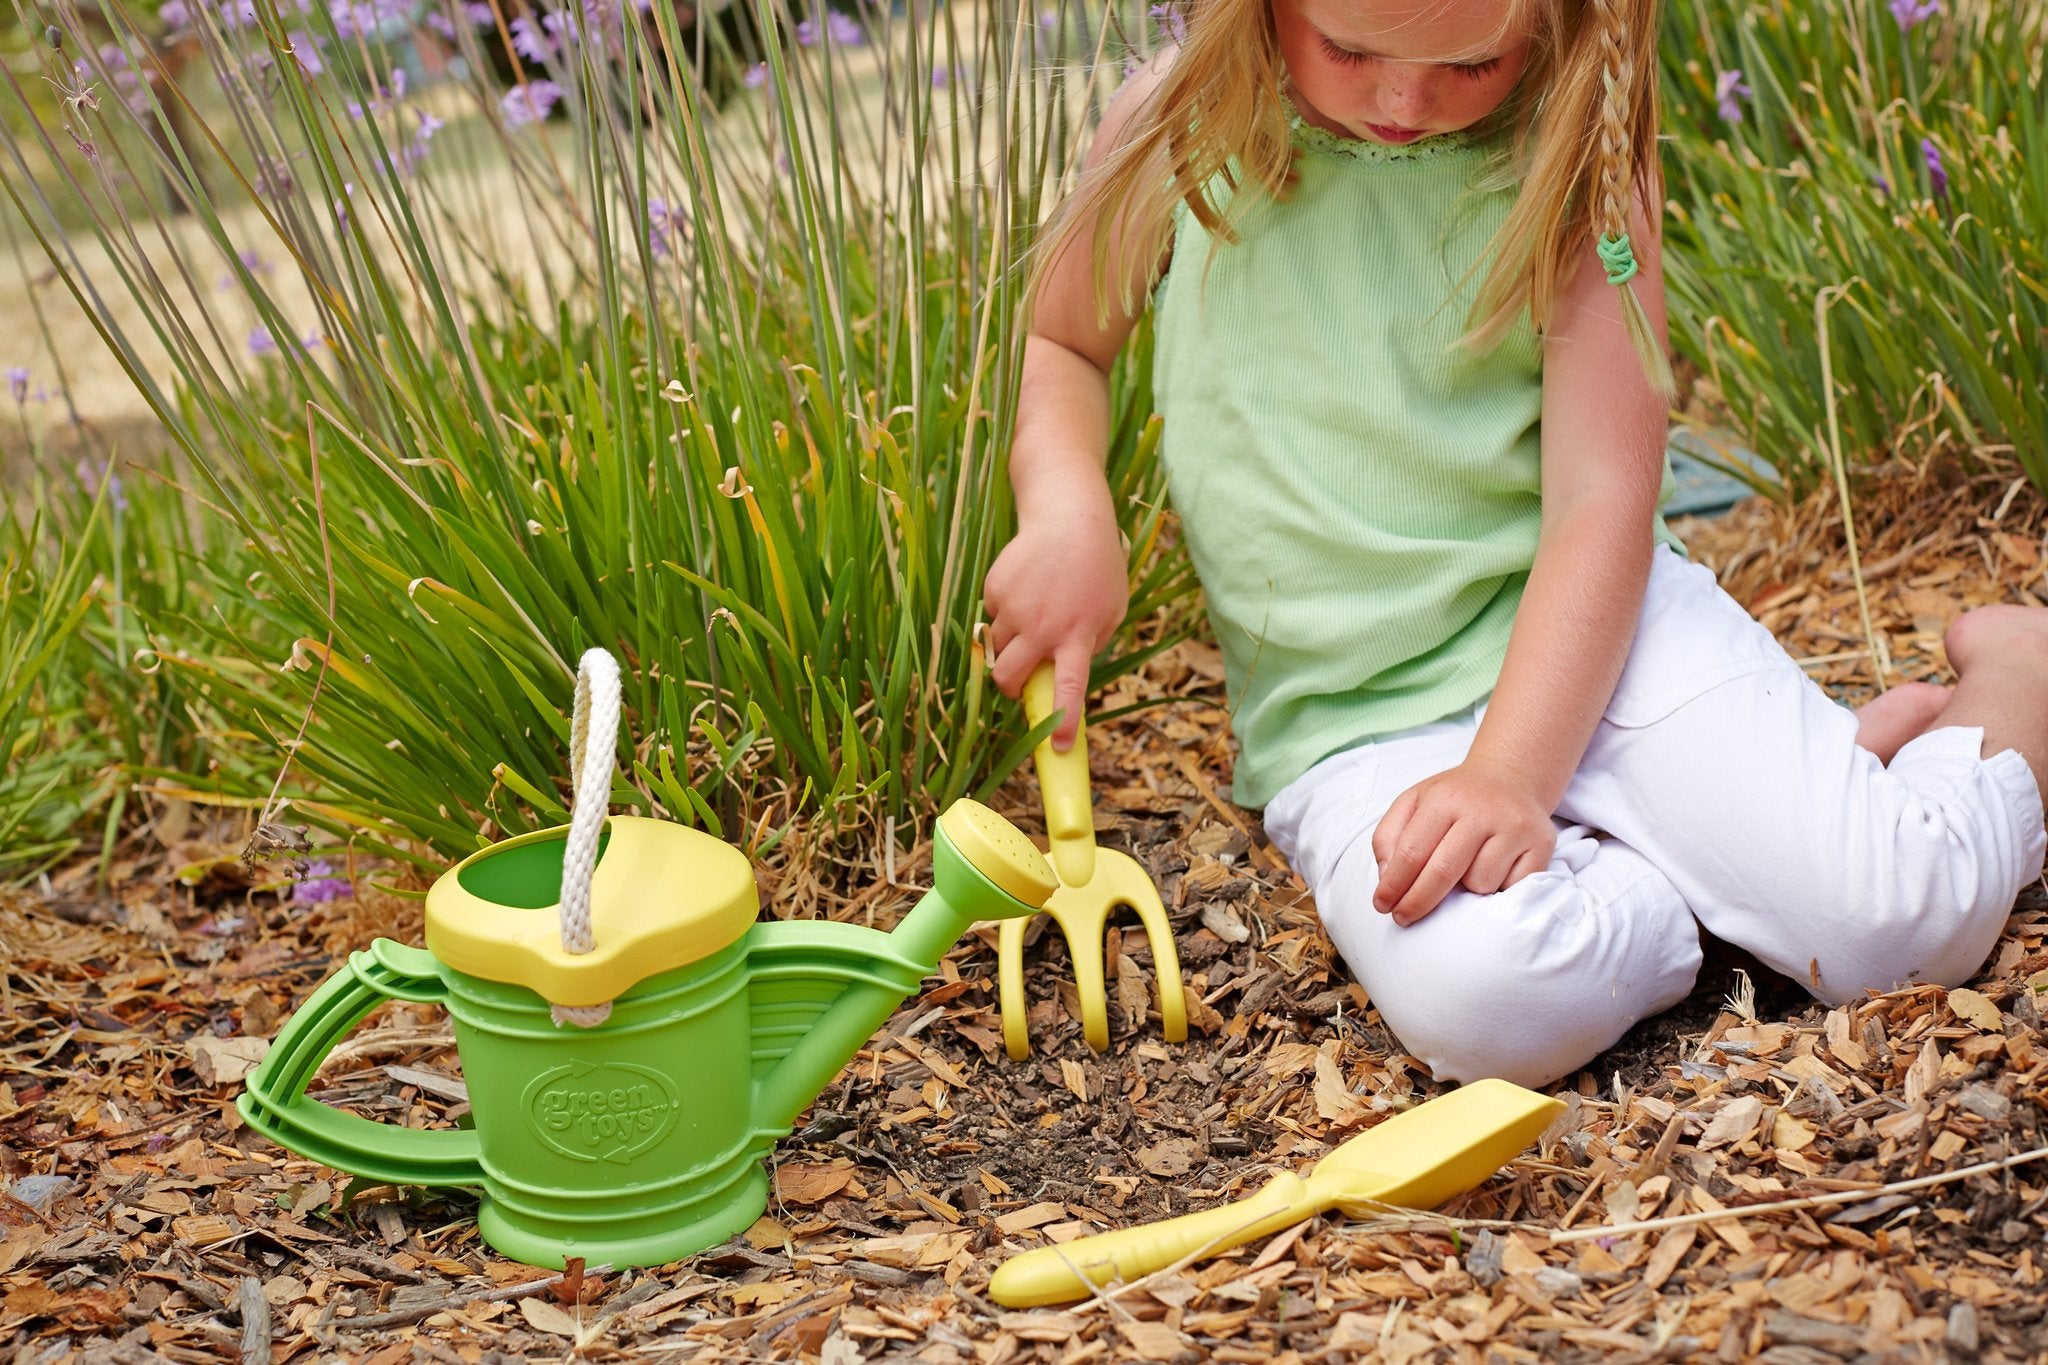 Green Toys - Garden Watering Can